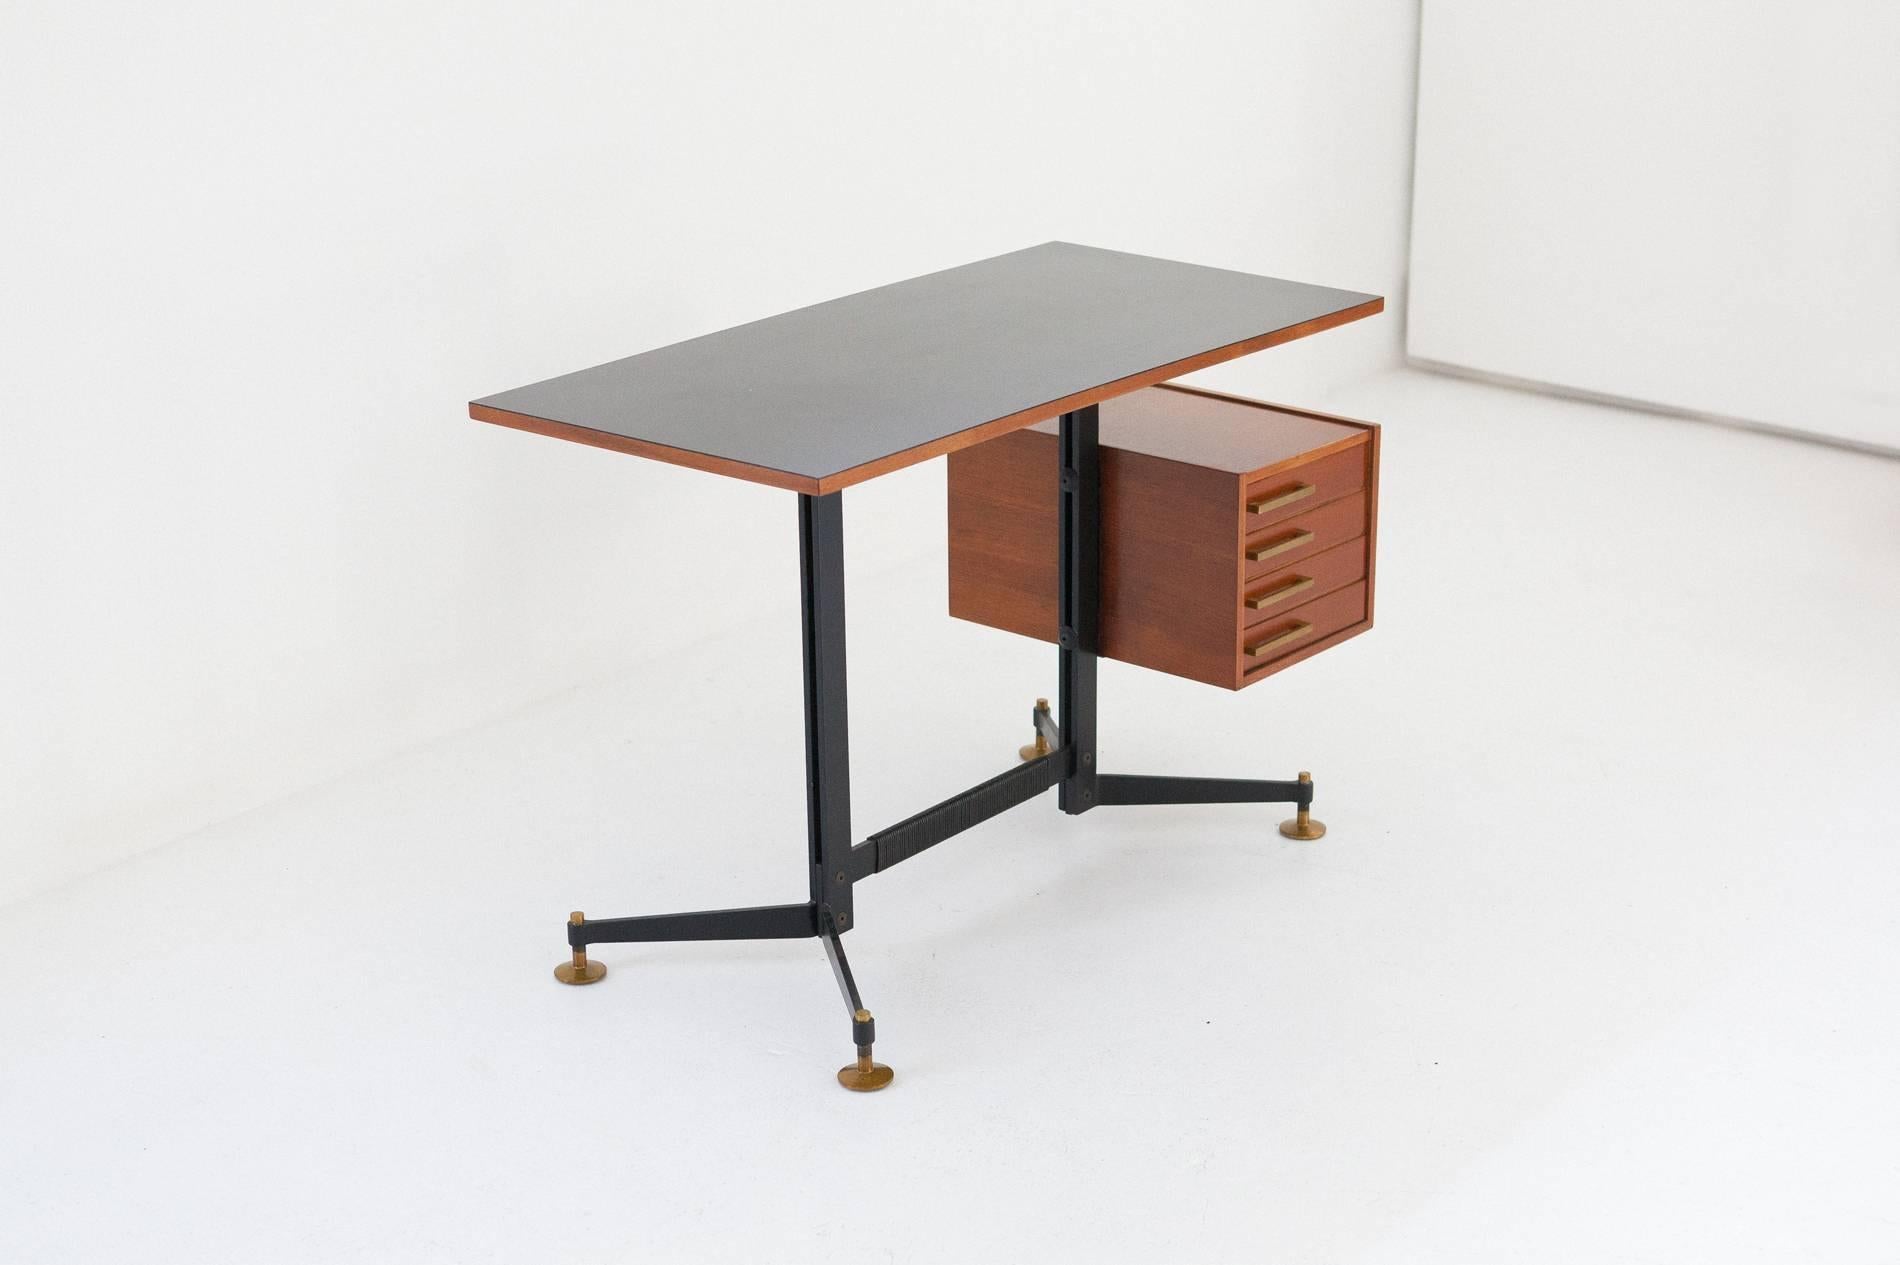 Italian desk from the 1950s
Iron frame, teak and formica
Completely restored 
1950s
The formica plan shows signs of aging that can only be seen closely